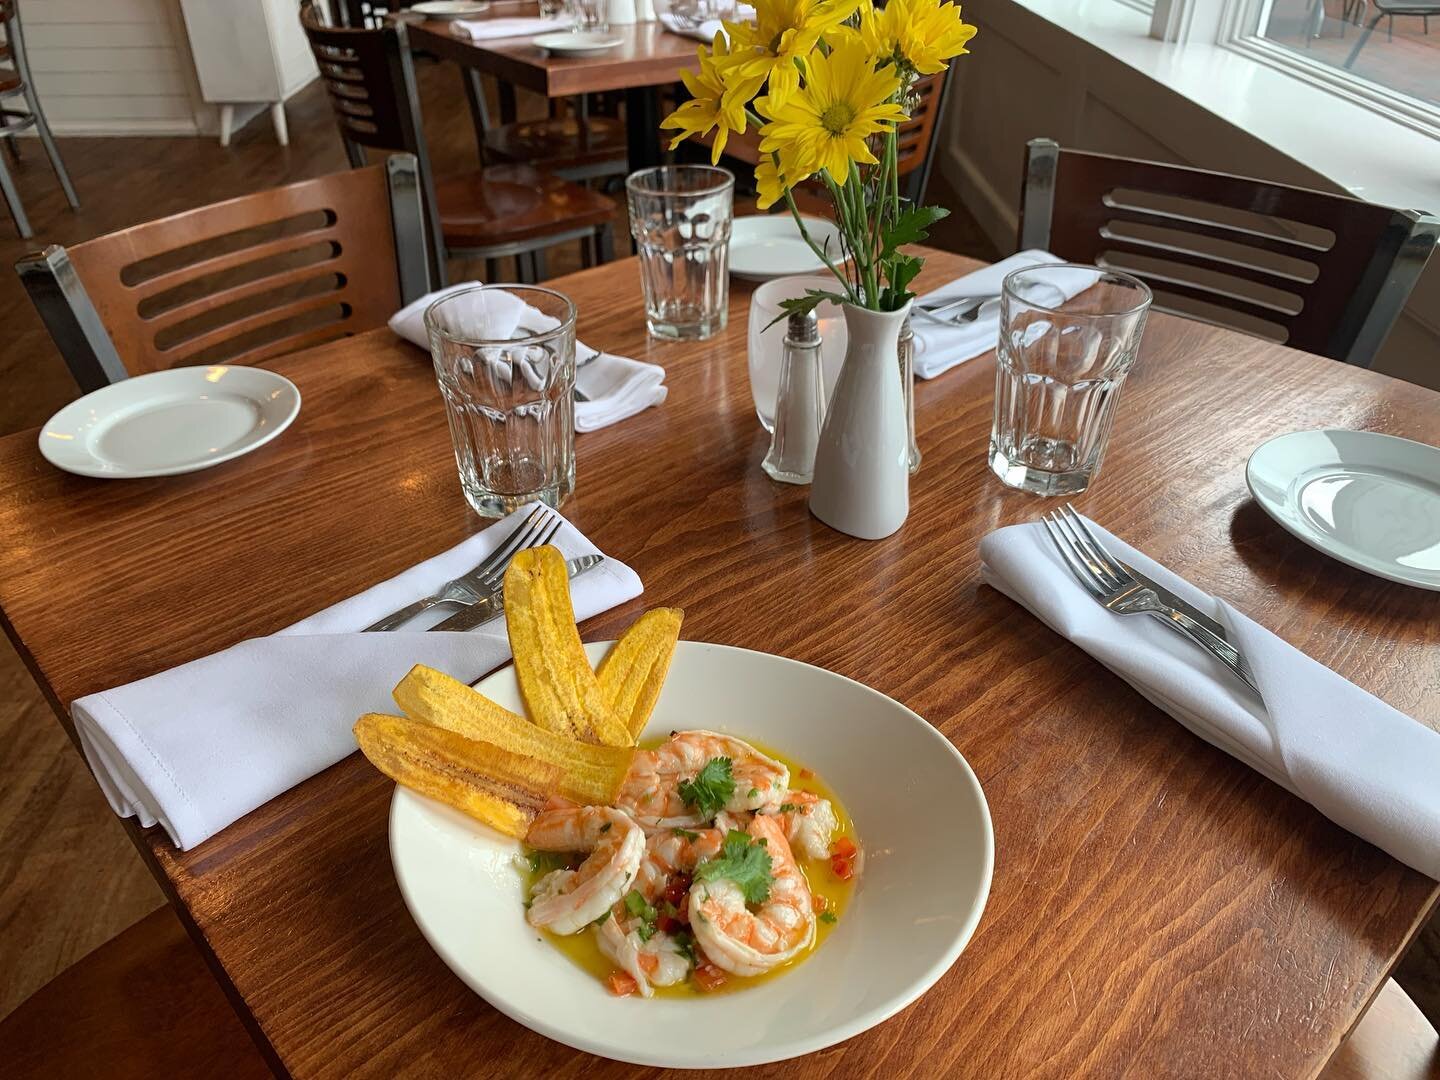 Heat and humidity calls for a fresh and light appetizer. Tonight&rsquo;s Ceviche is Shrimp Ceviche with citrus pepper marinade and crispy plantain chips #chathamma #capecod #gulfshrimp #coastalcuisine #dinnertime